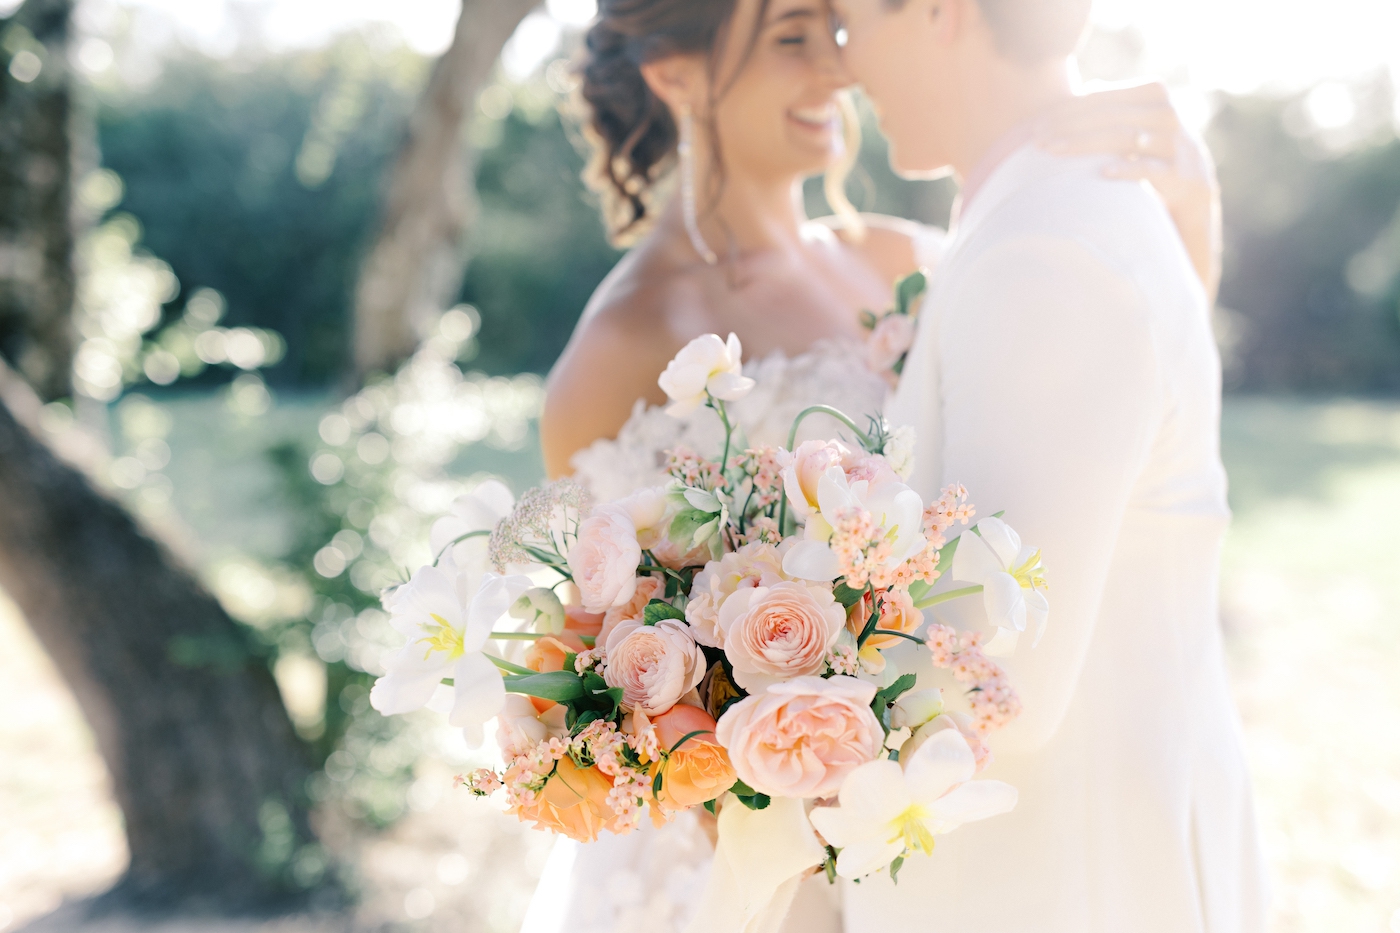 Mauve, cream, blush and yellow wedding flowers by Gypsy Floral